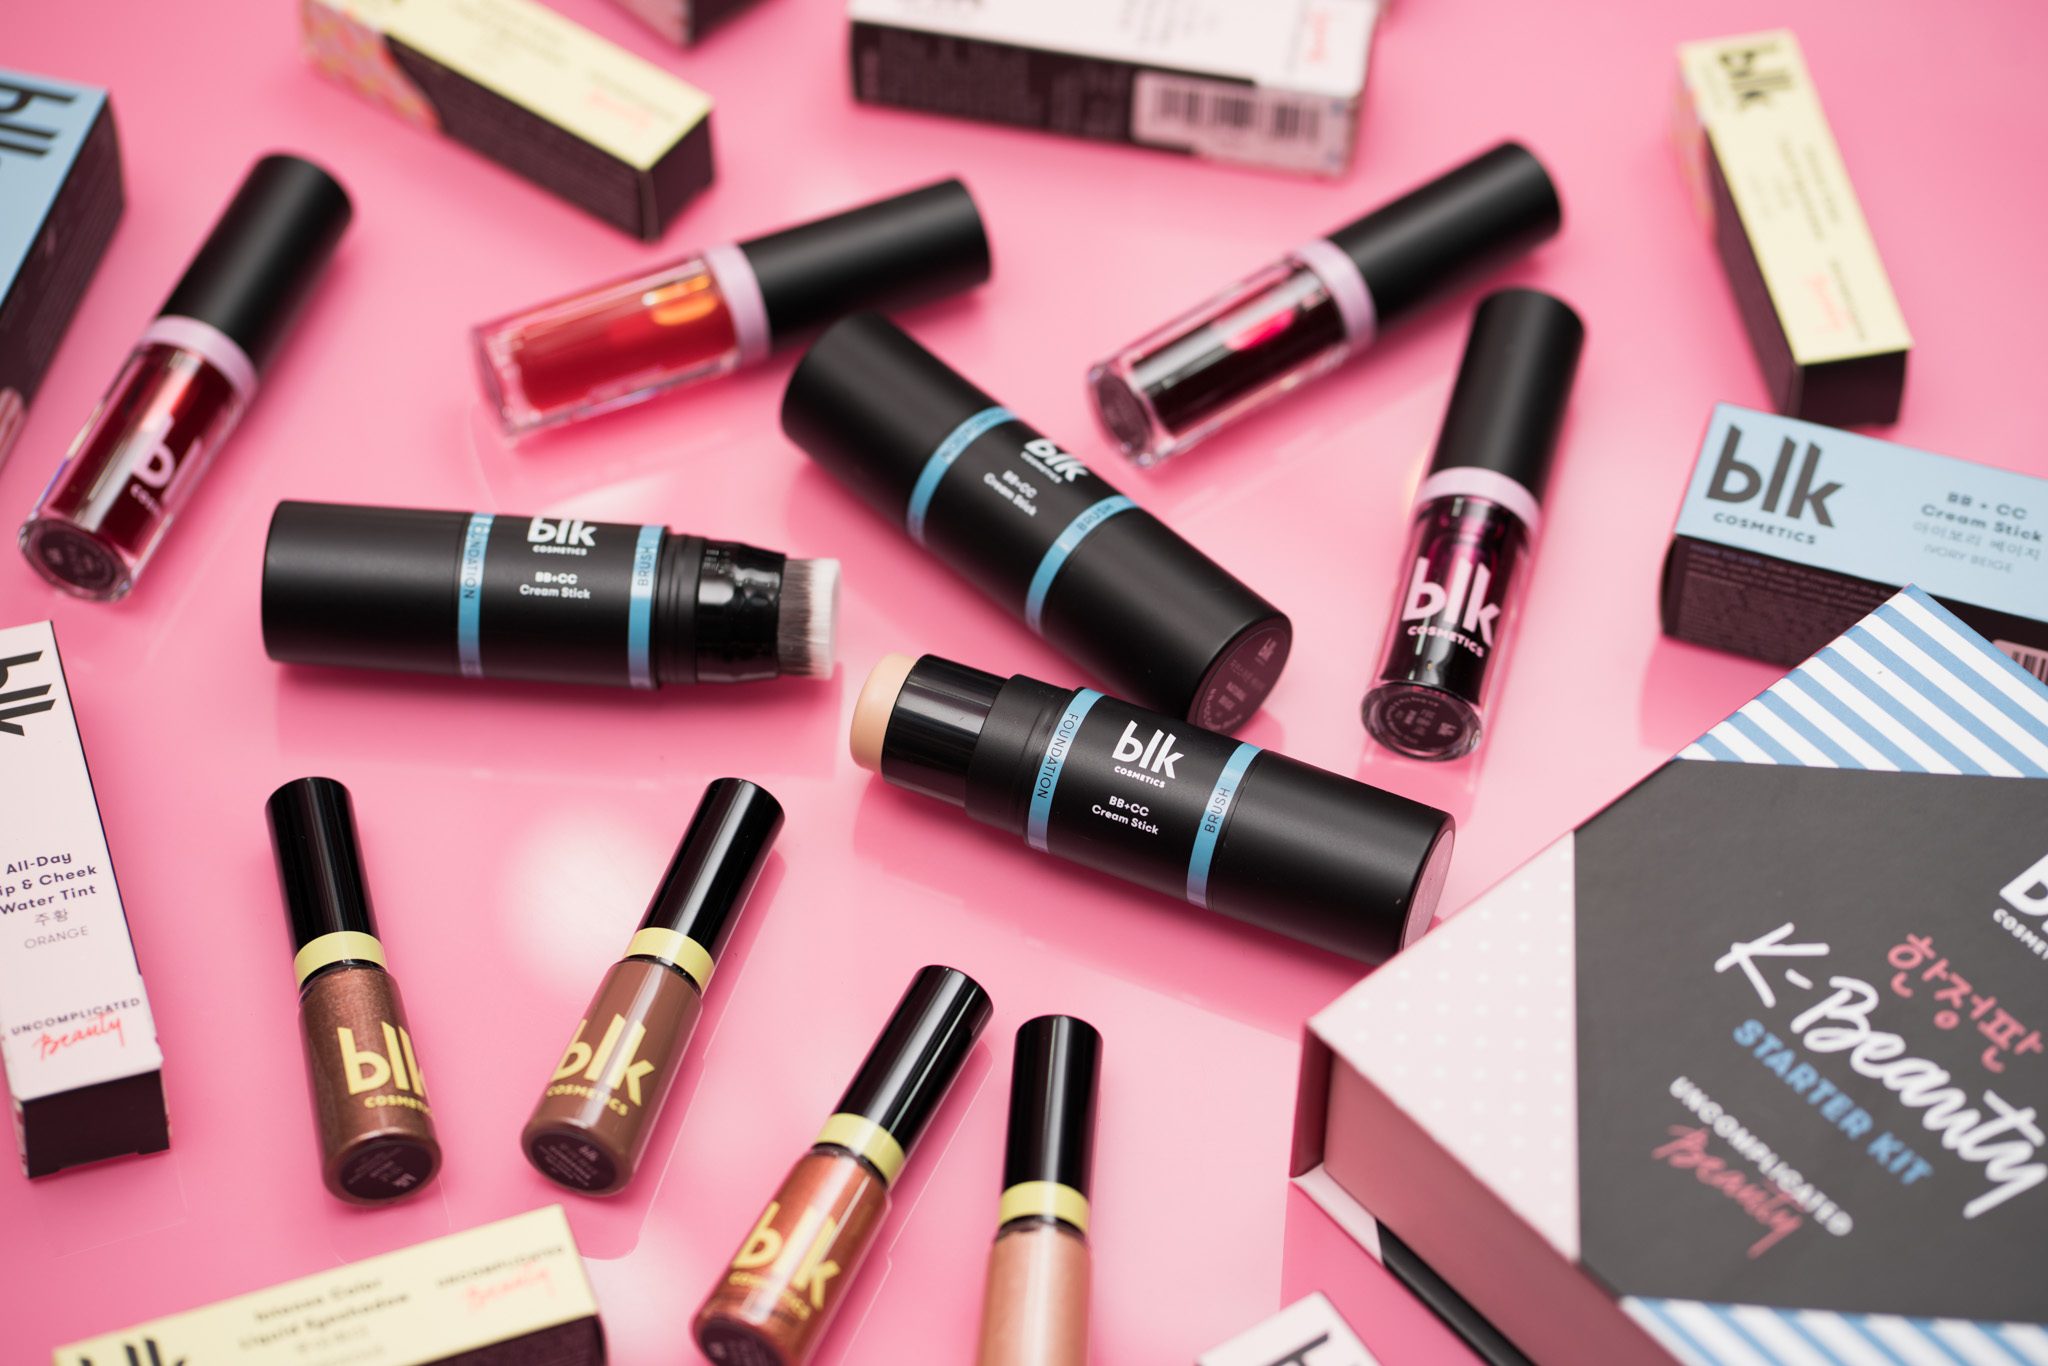 SNEAK PEEK: blk Cosmetics' summer collection is all about K-beauty